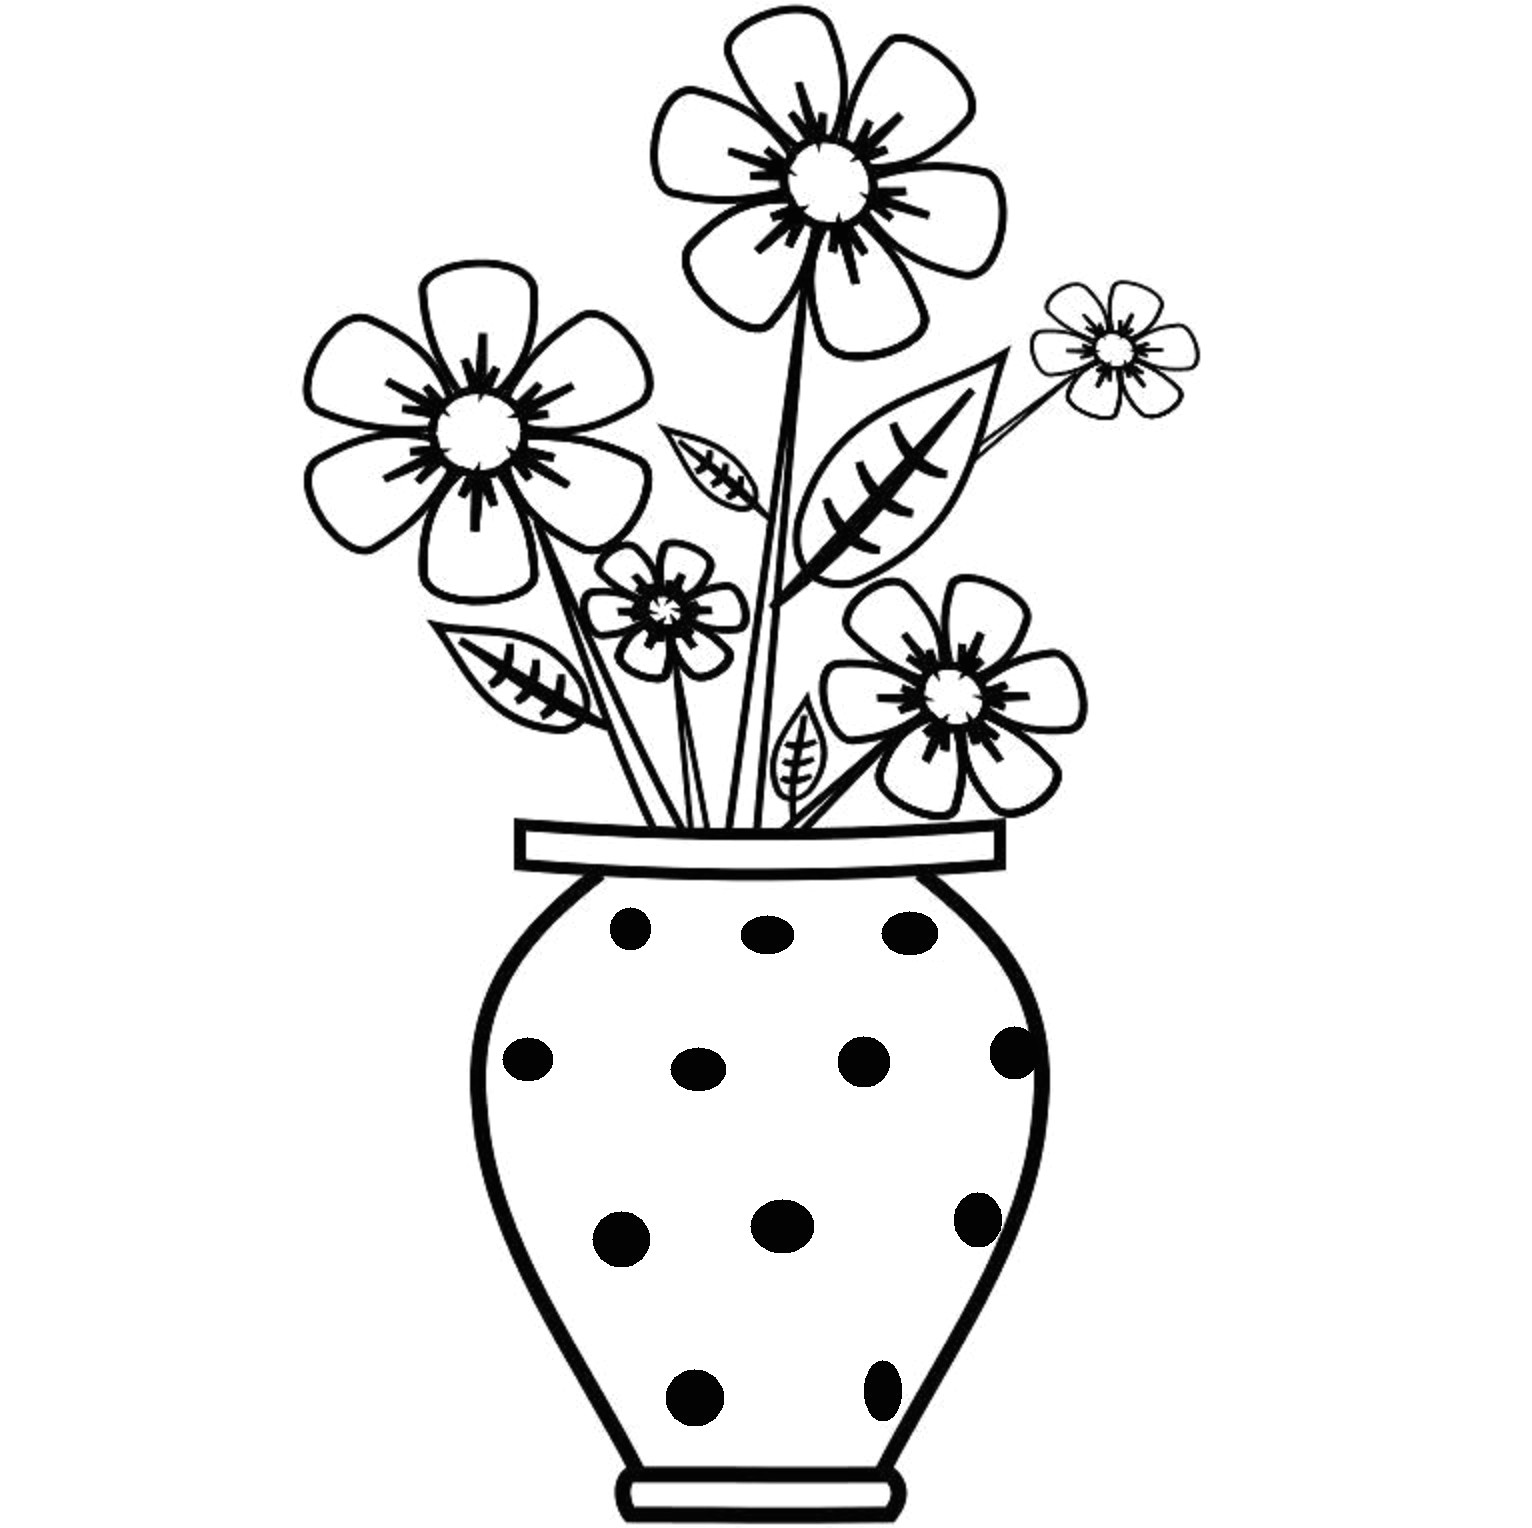 Drawing Of All Flowers Flowers to Draw Easy Step by Step Prslide Com